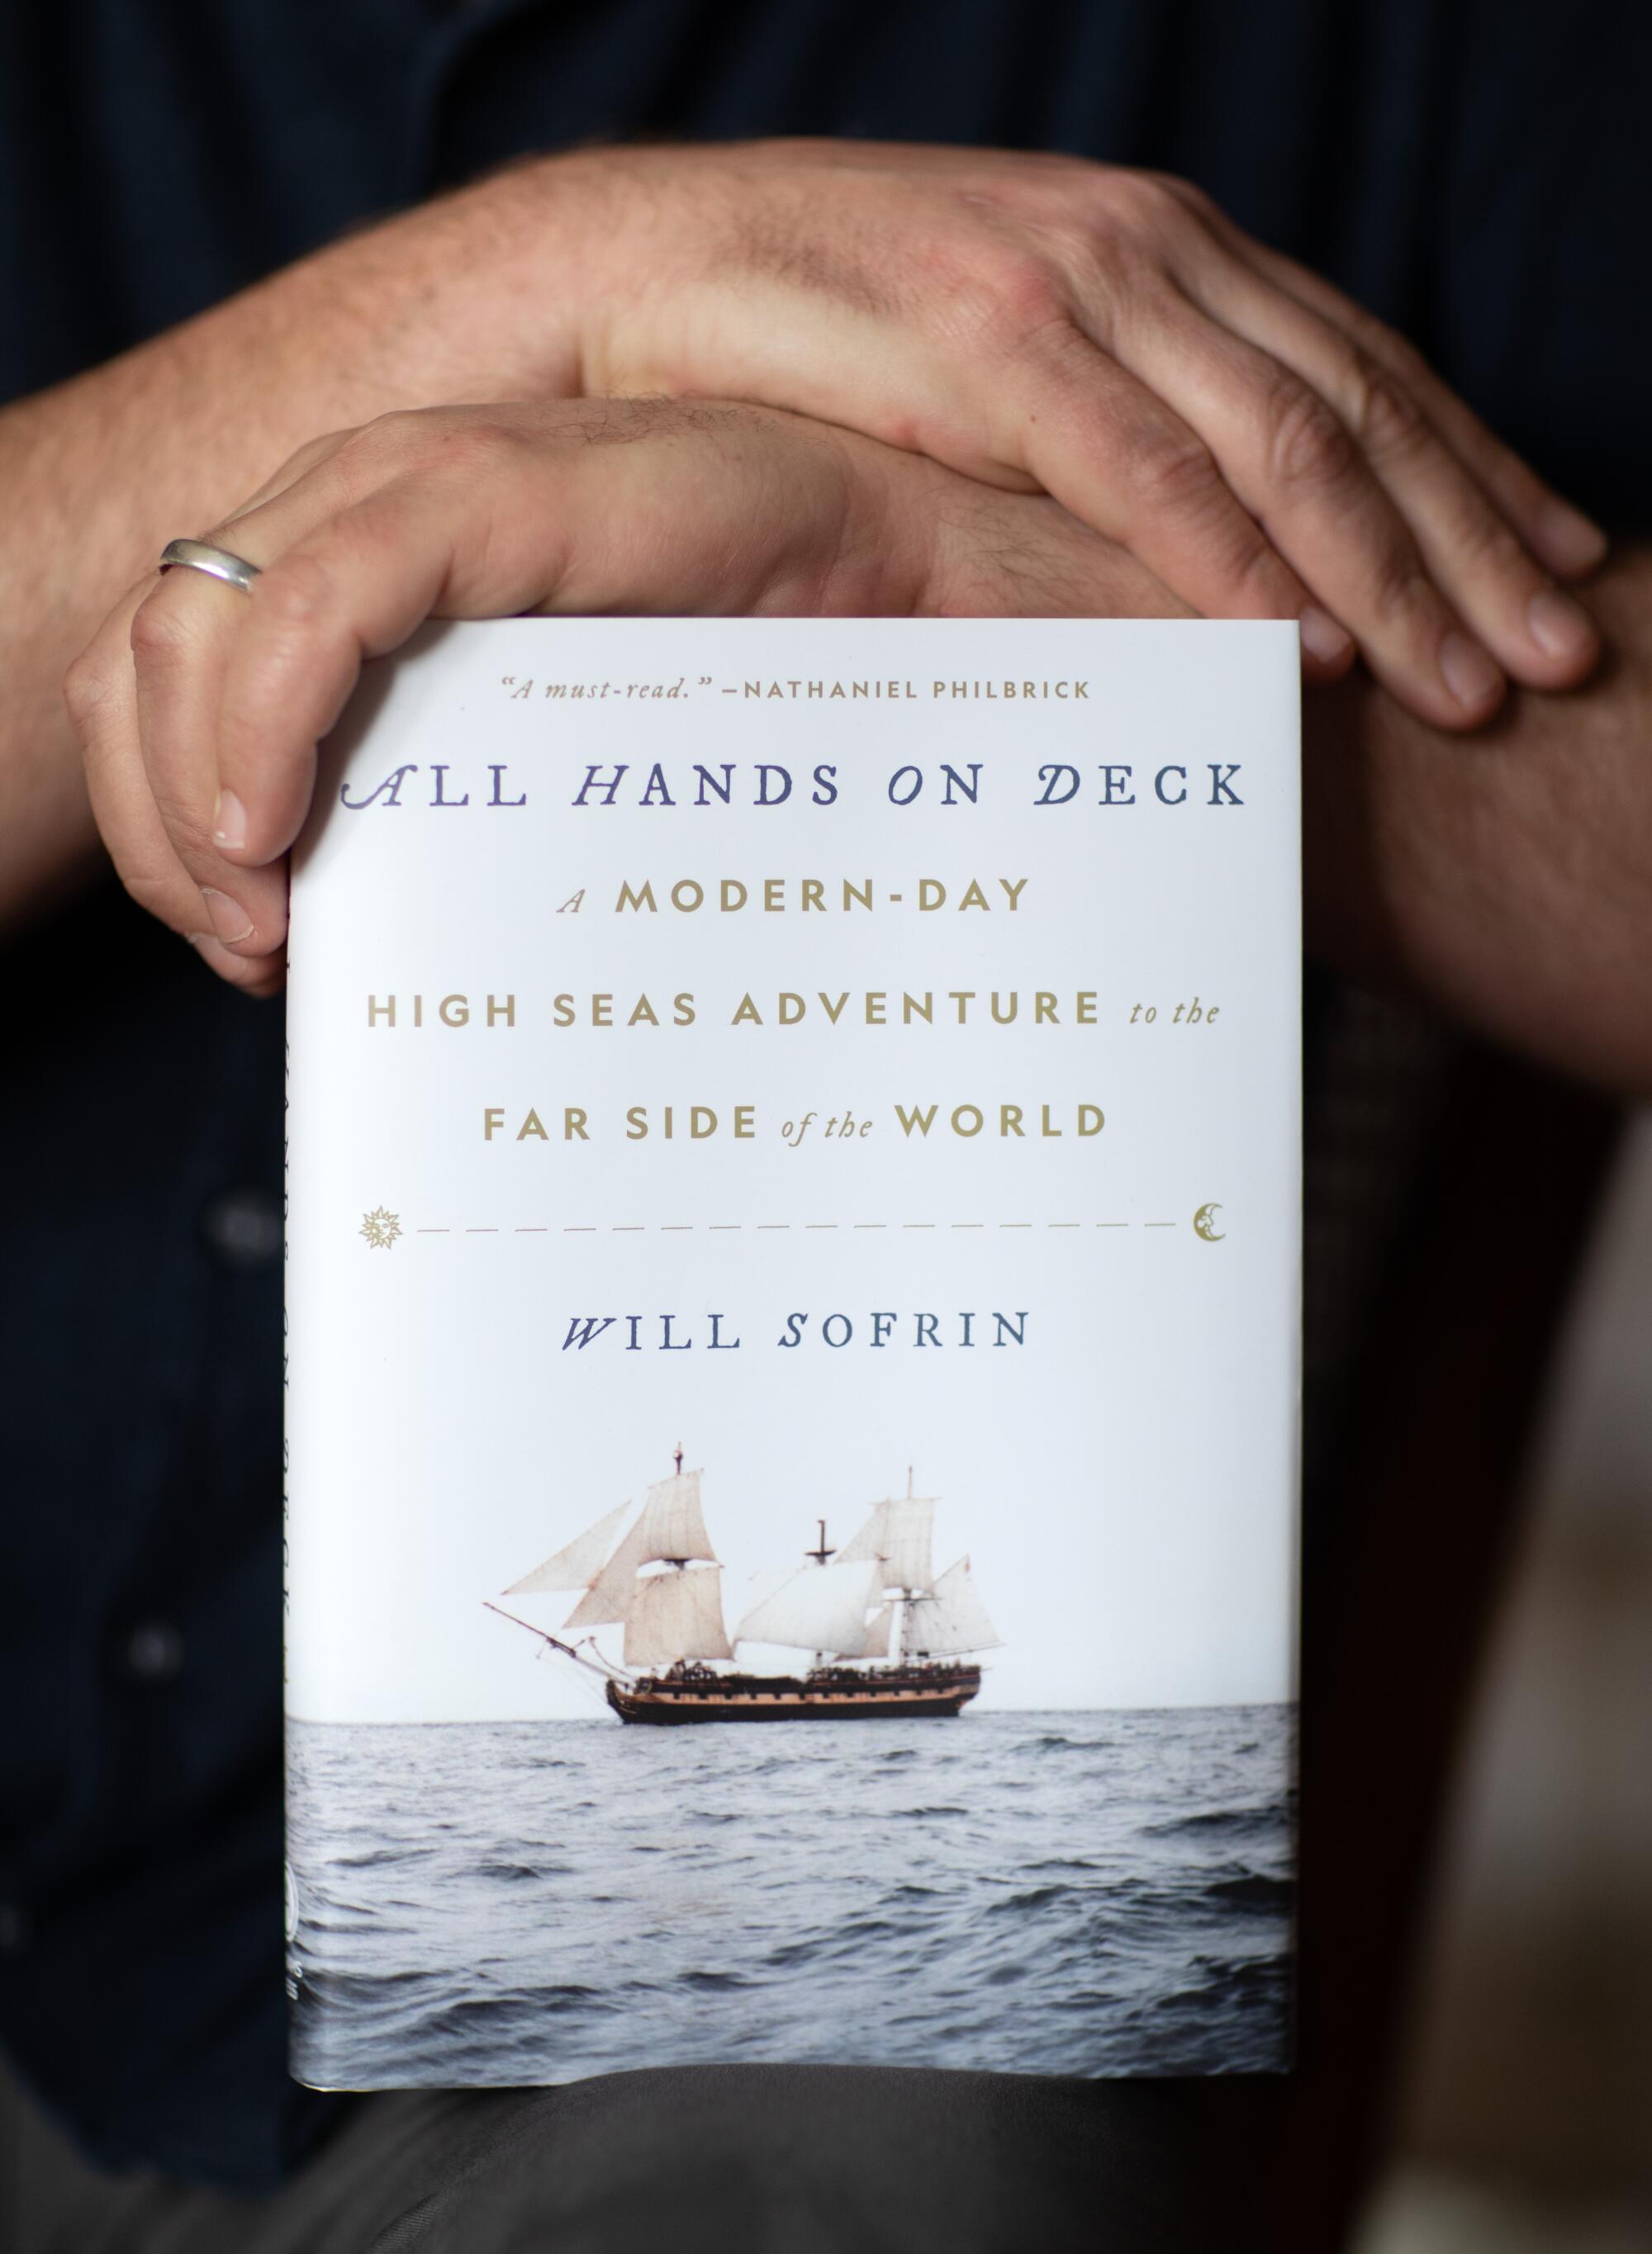 A copy of the book "All Hands on Deck."